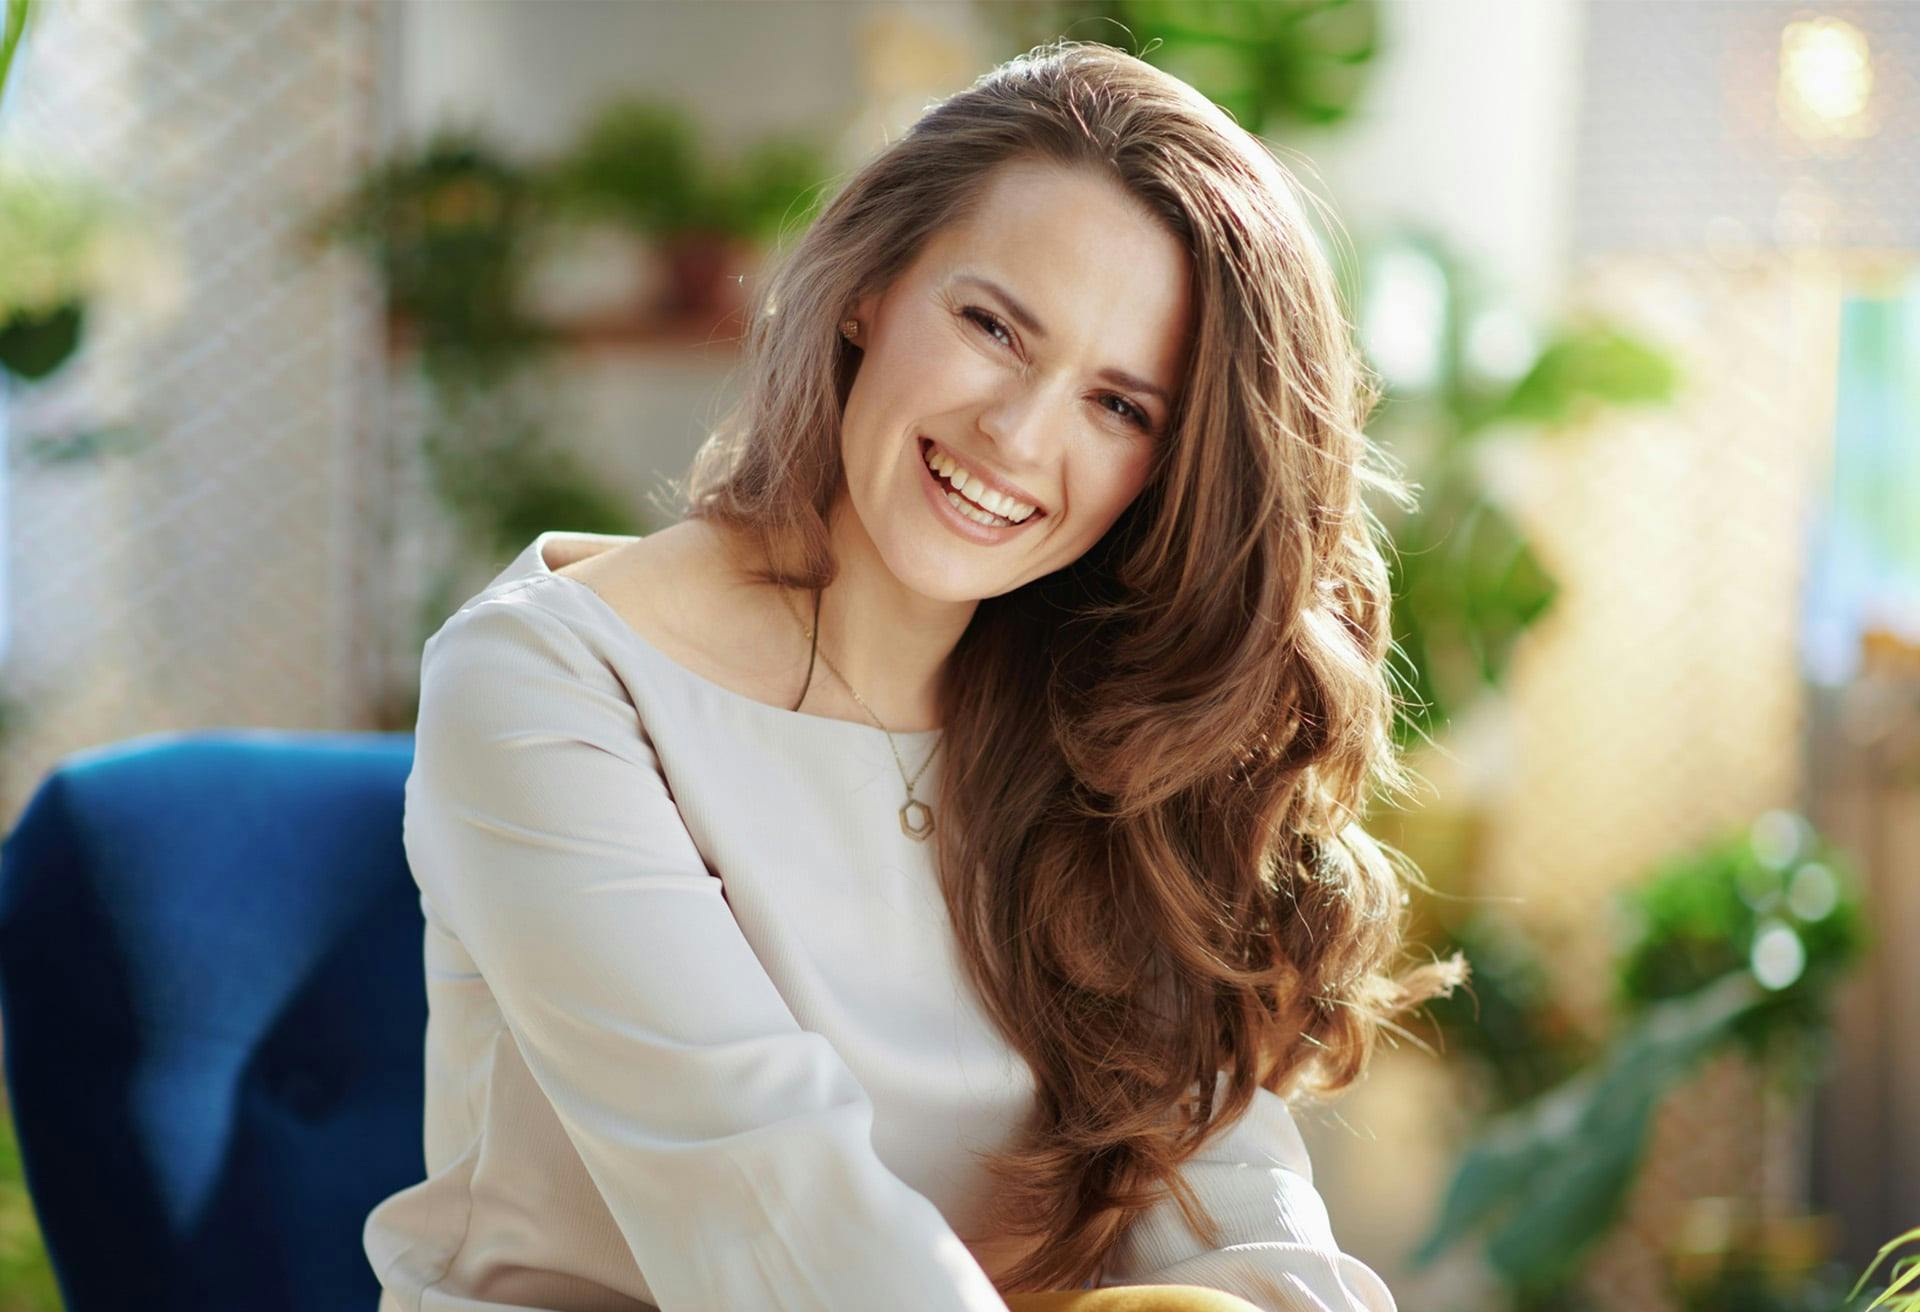 woman with cream colored blouse and brown long hair smiling